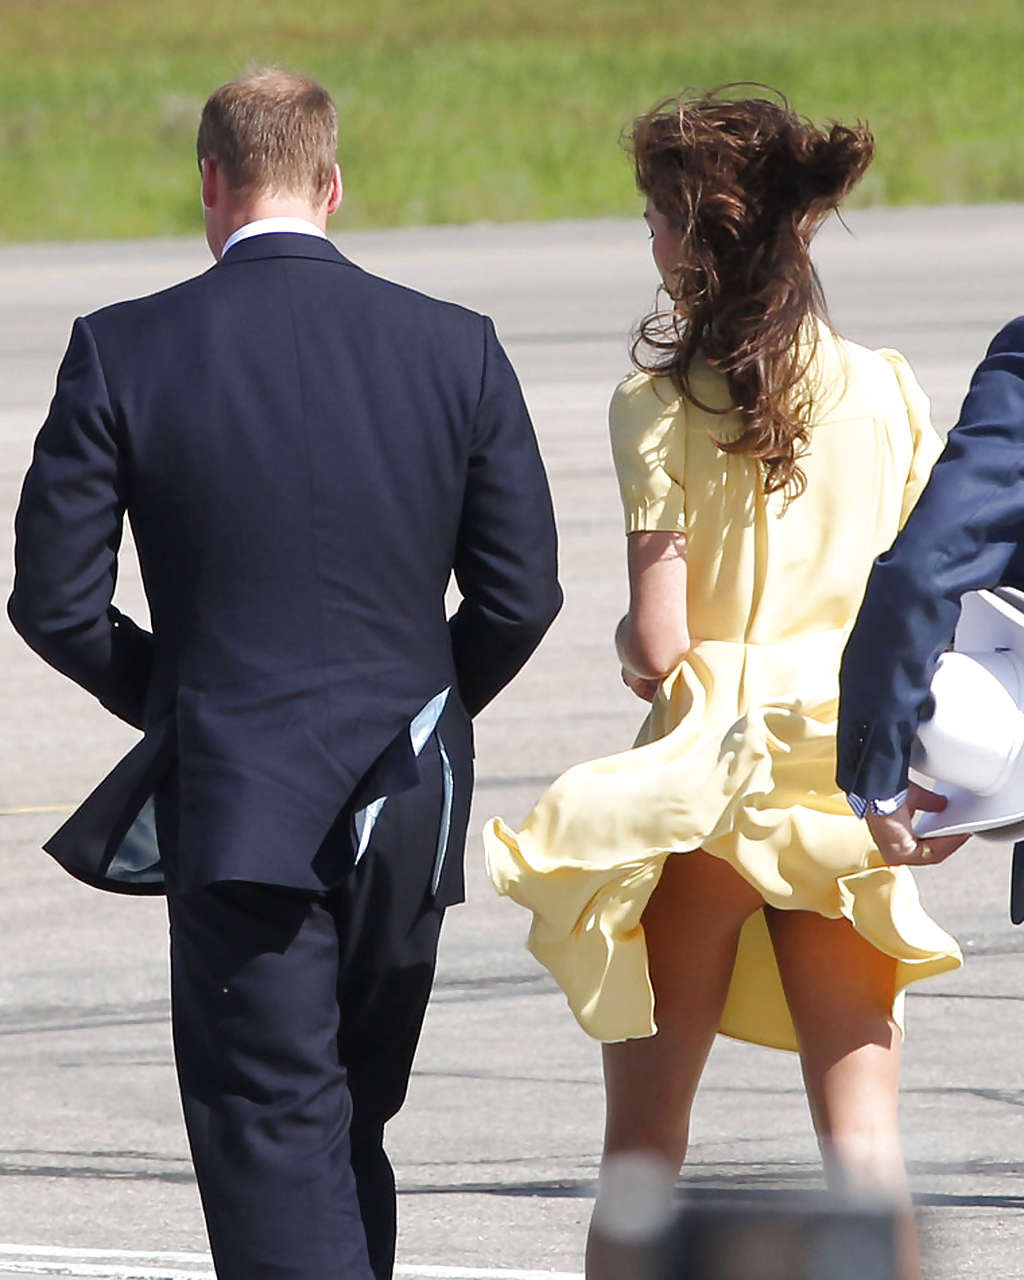 Kate Middleton showing her panties while wind blow her yellow dress #75296868